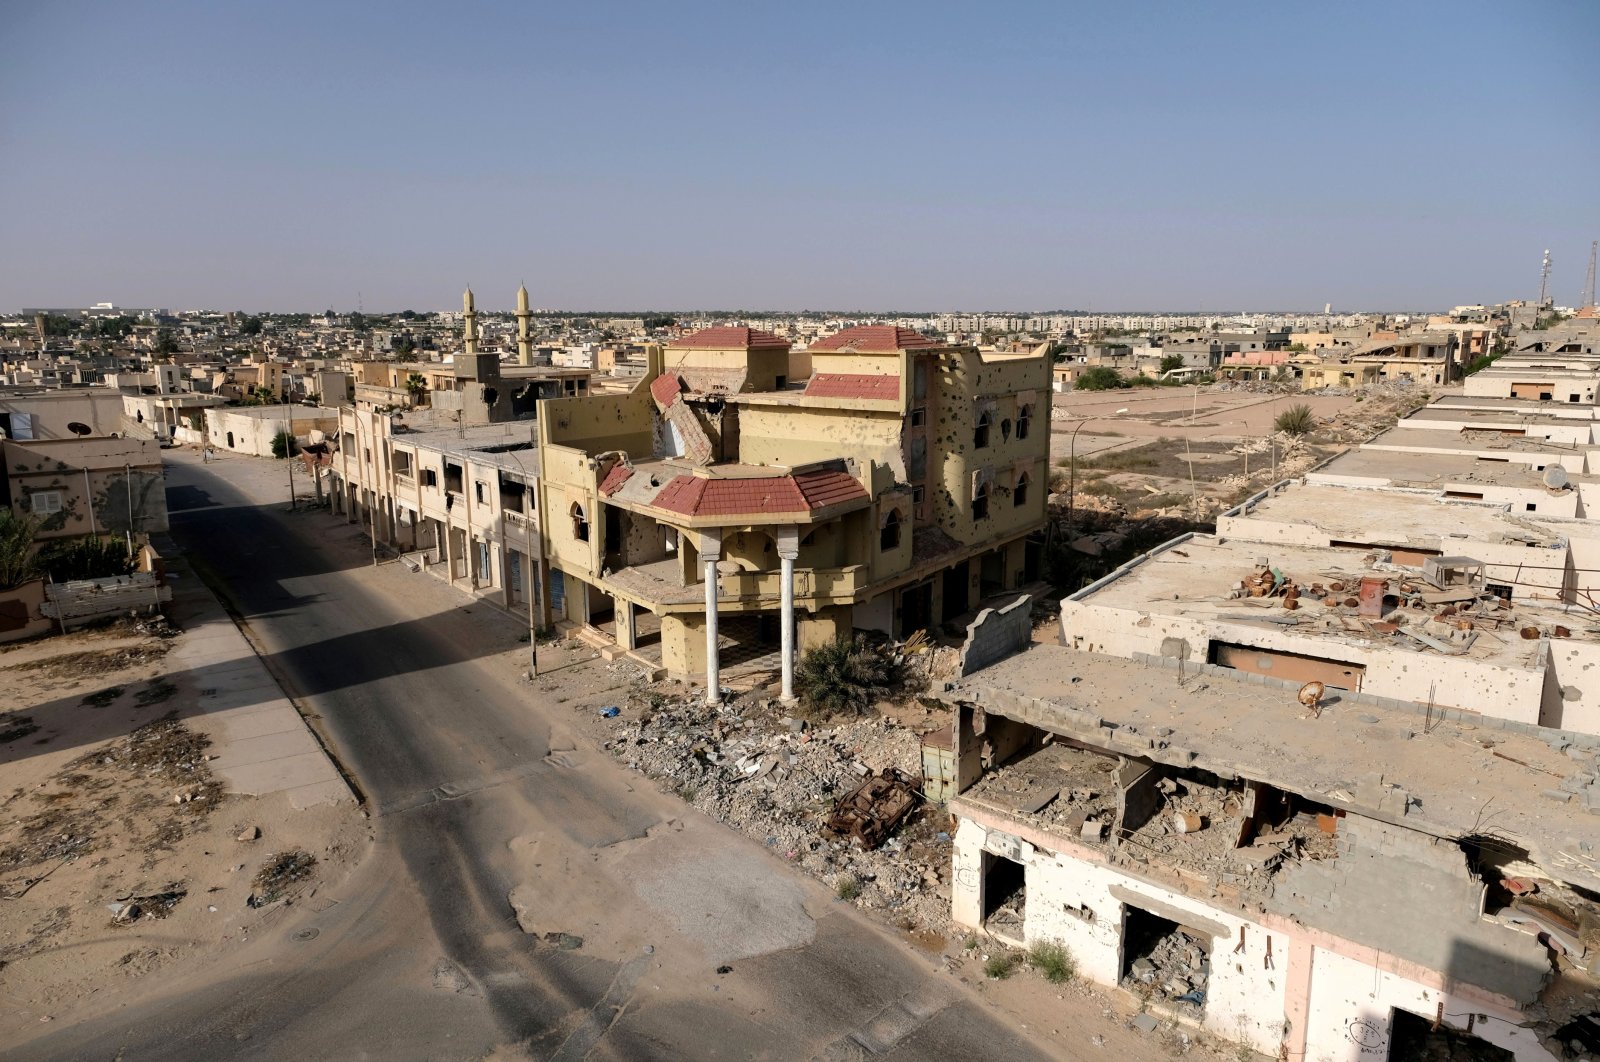 Buildings destroyed during past clashes remain part of the scenery in Sirte, Libya, Aug. 18, 2020. (REUTERS Photo)